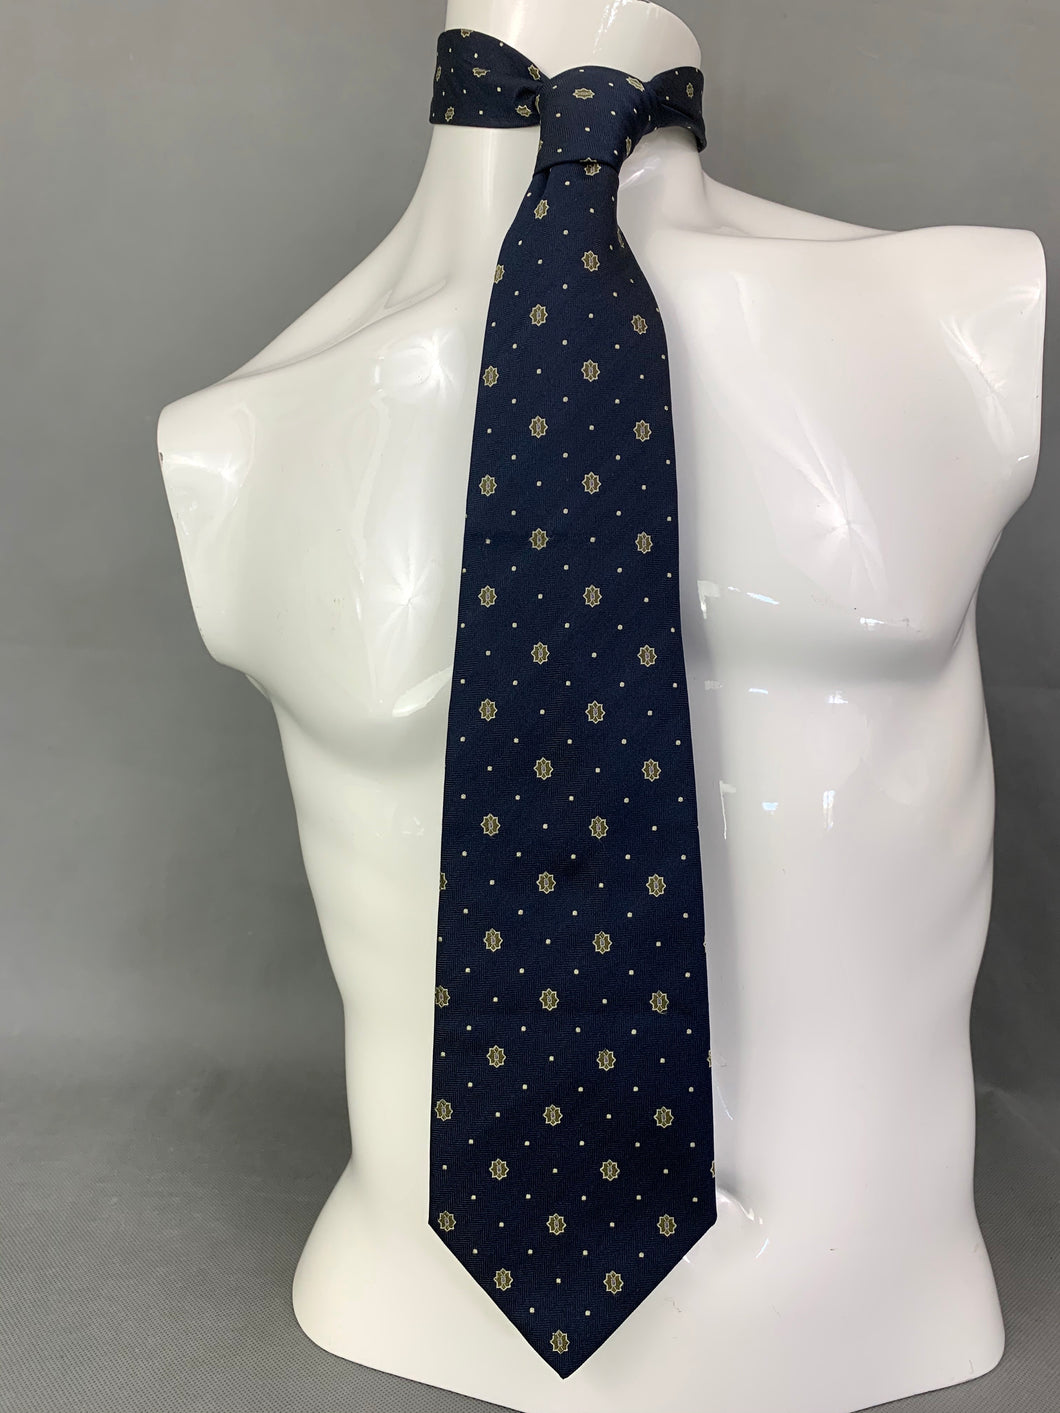 DUNHILL Mens 100% Silk TIE - Made in Italy